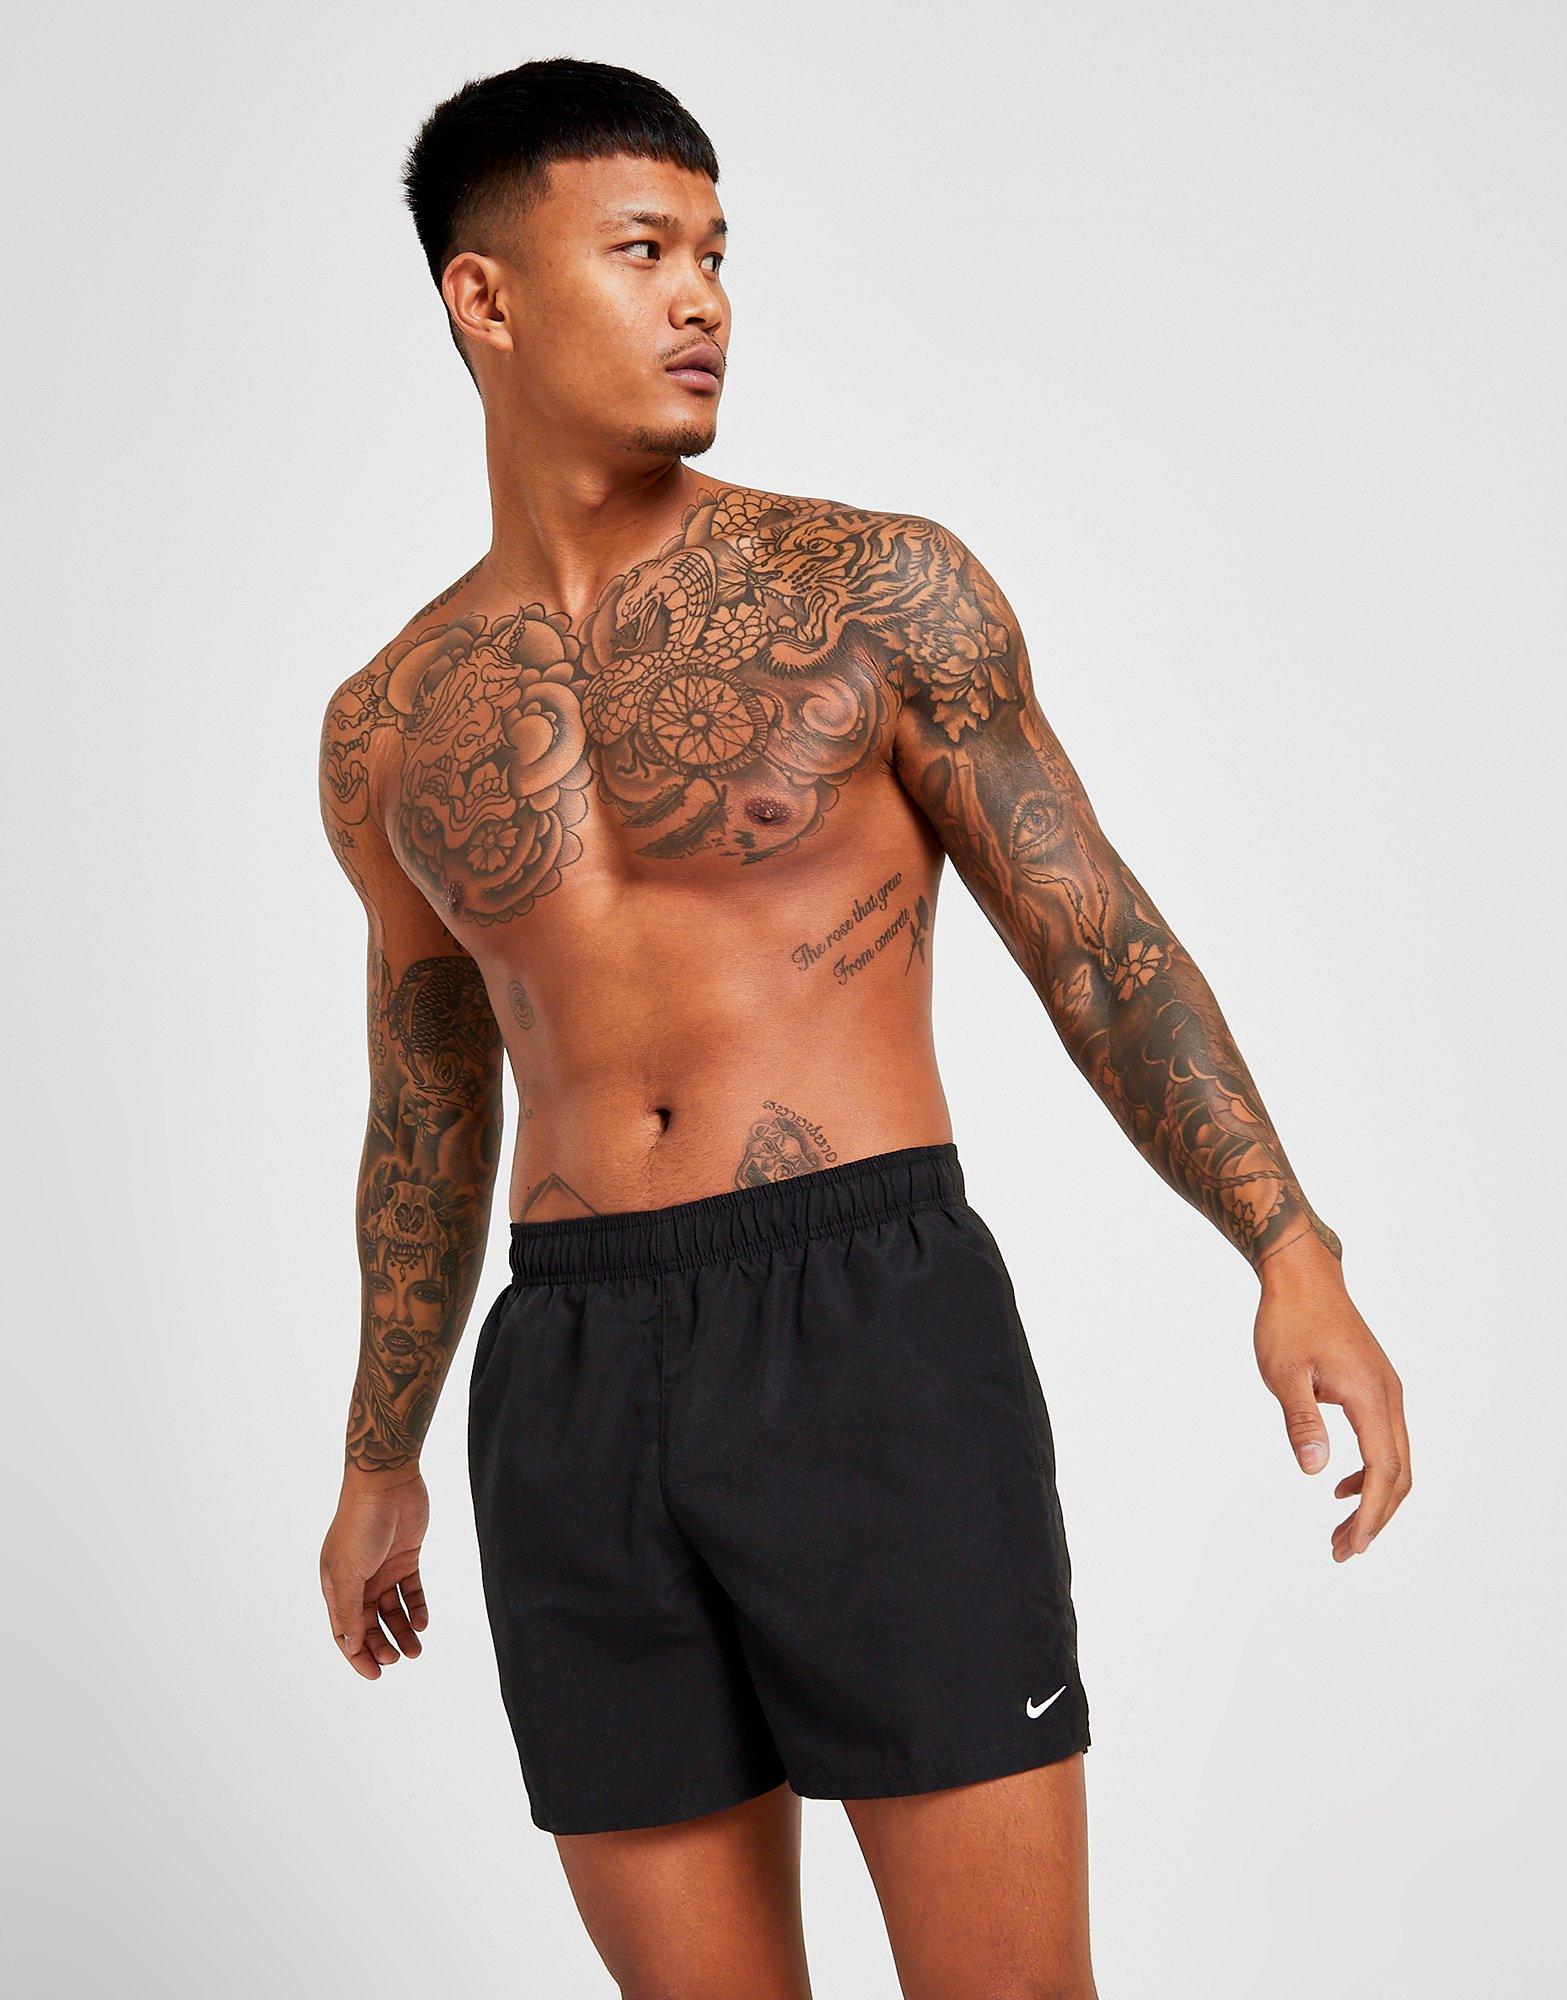 Nike Swimming Volley 5 inch shorts in black